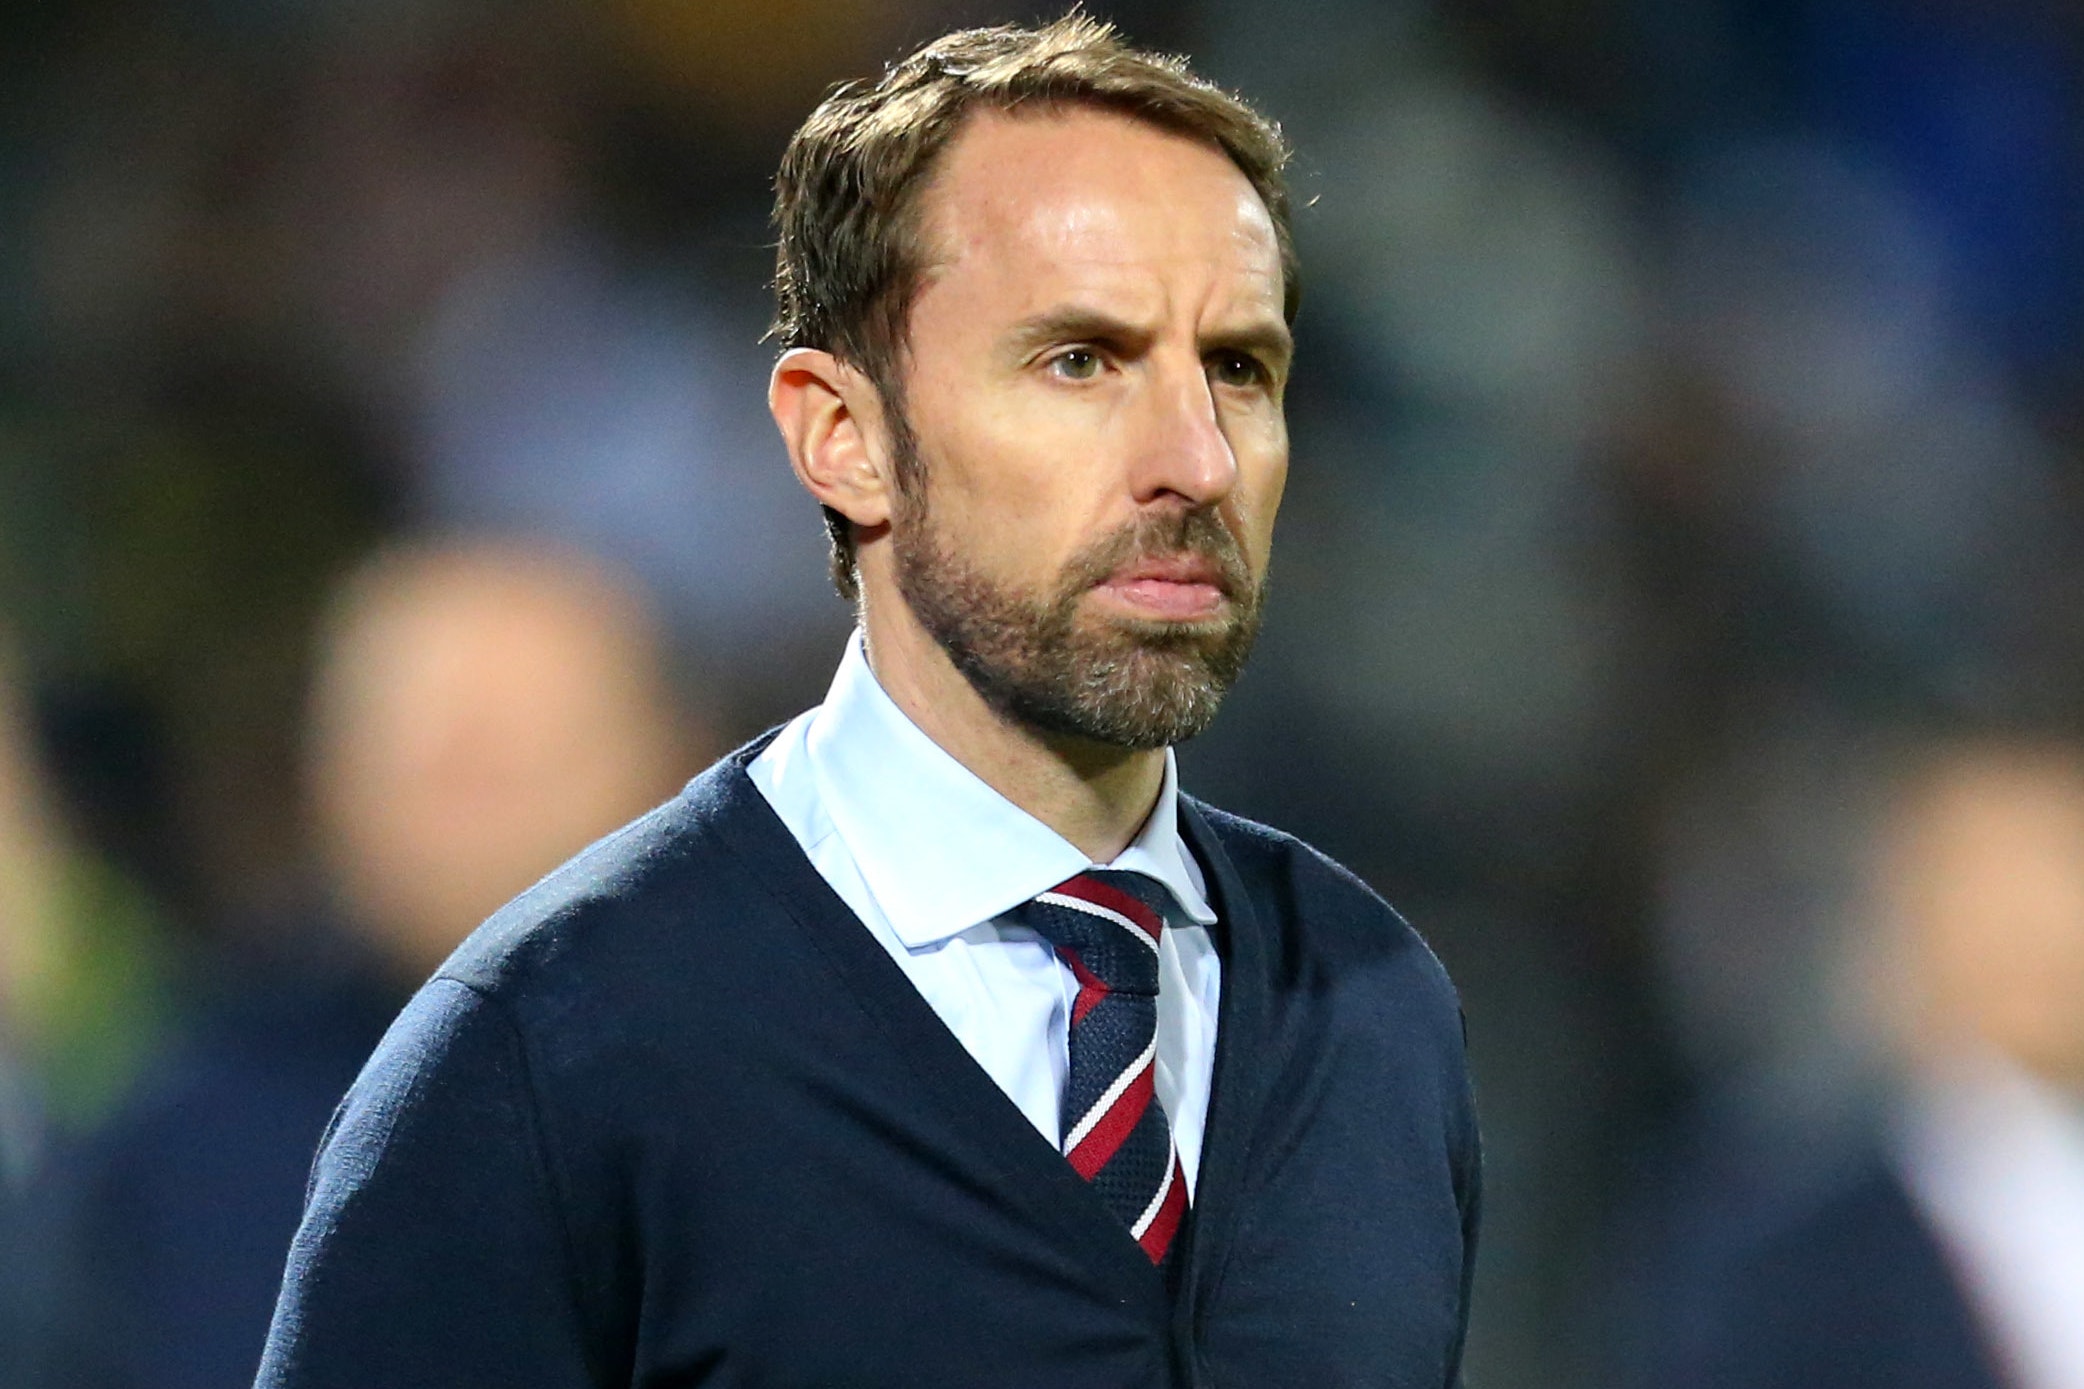 Gareth Southgate planning for Qatar 2022 but 'realistic' over England future - Ealing Times